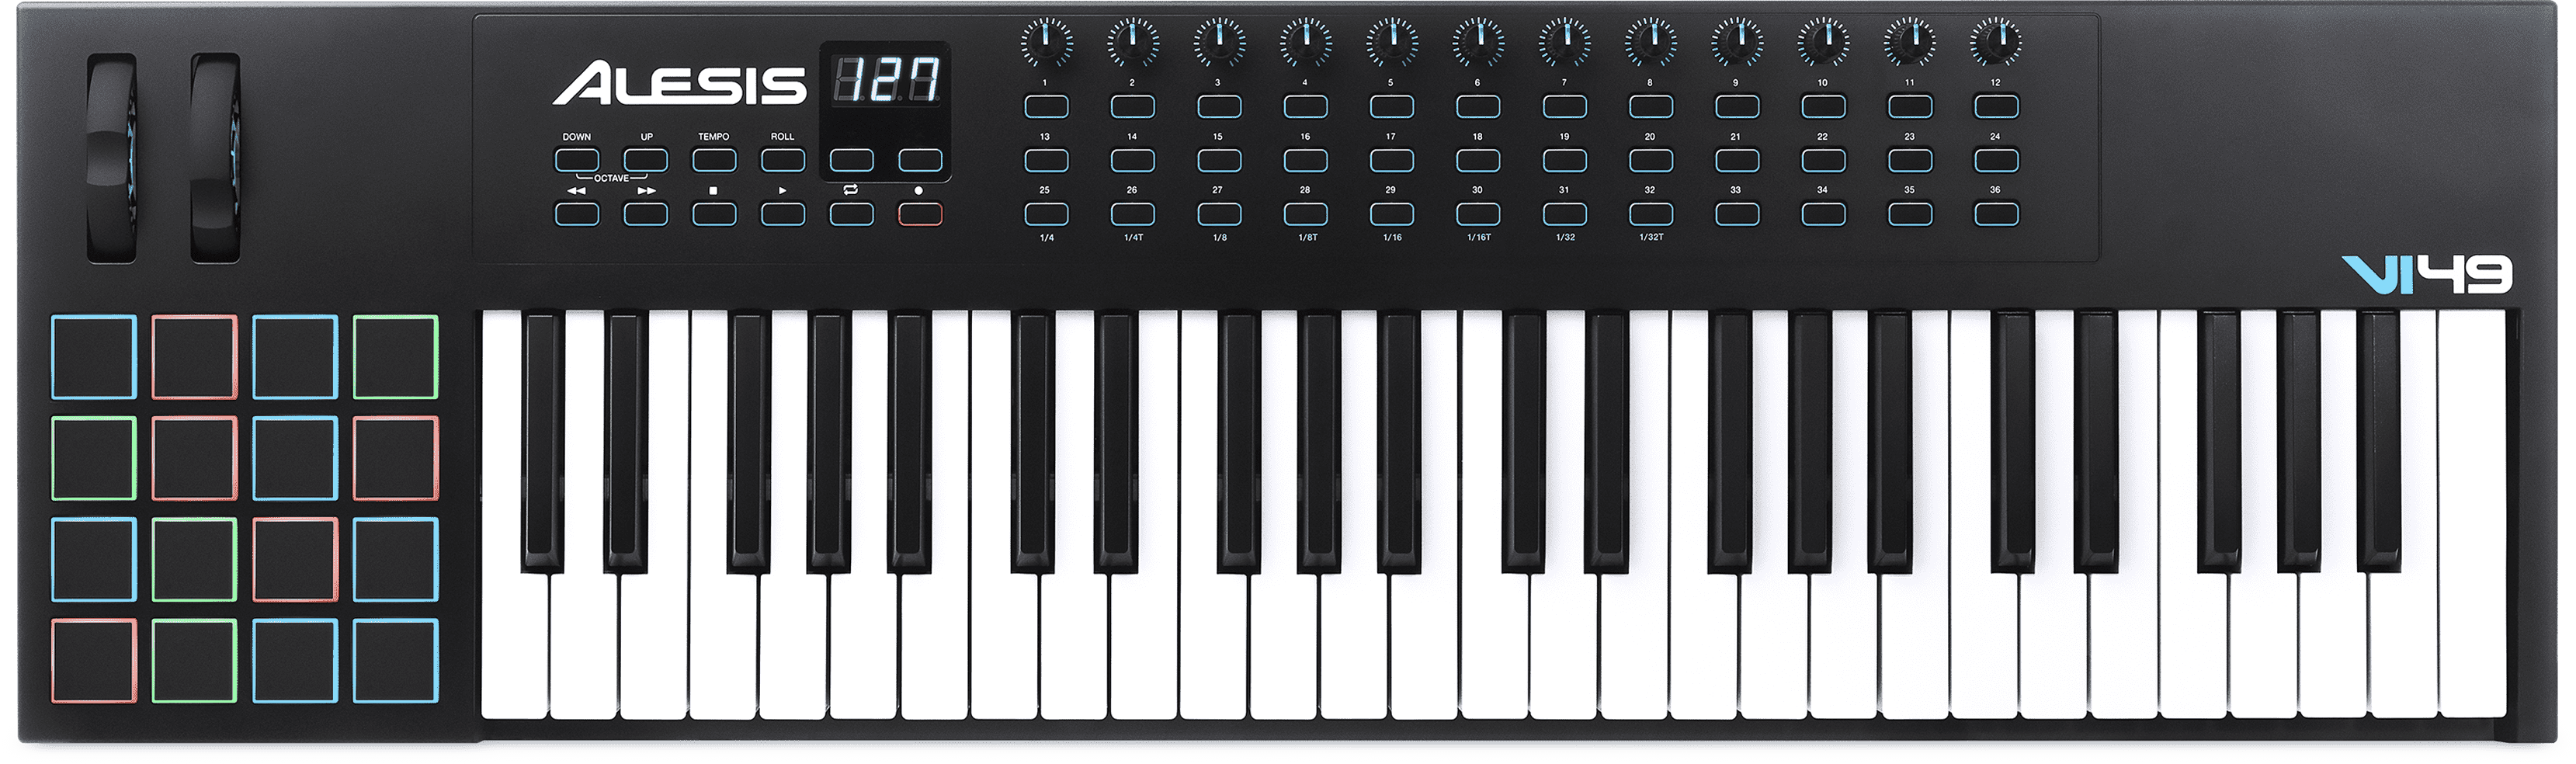 Any MIDI capable keyboard, pad controller, or drum kit.